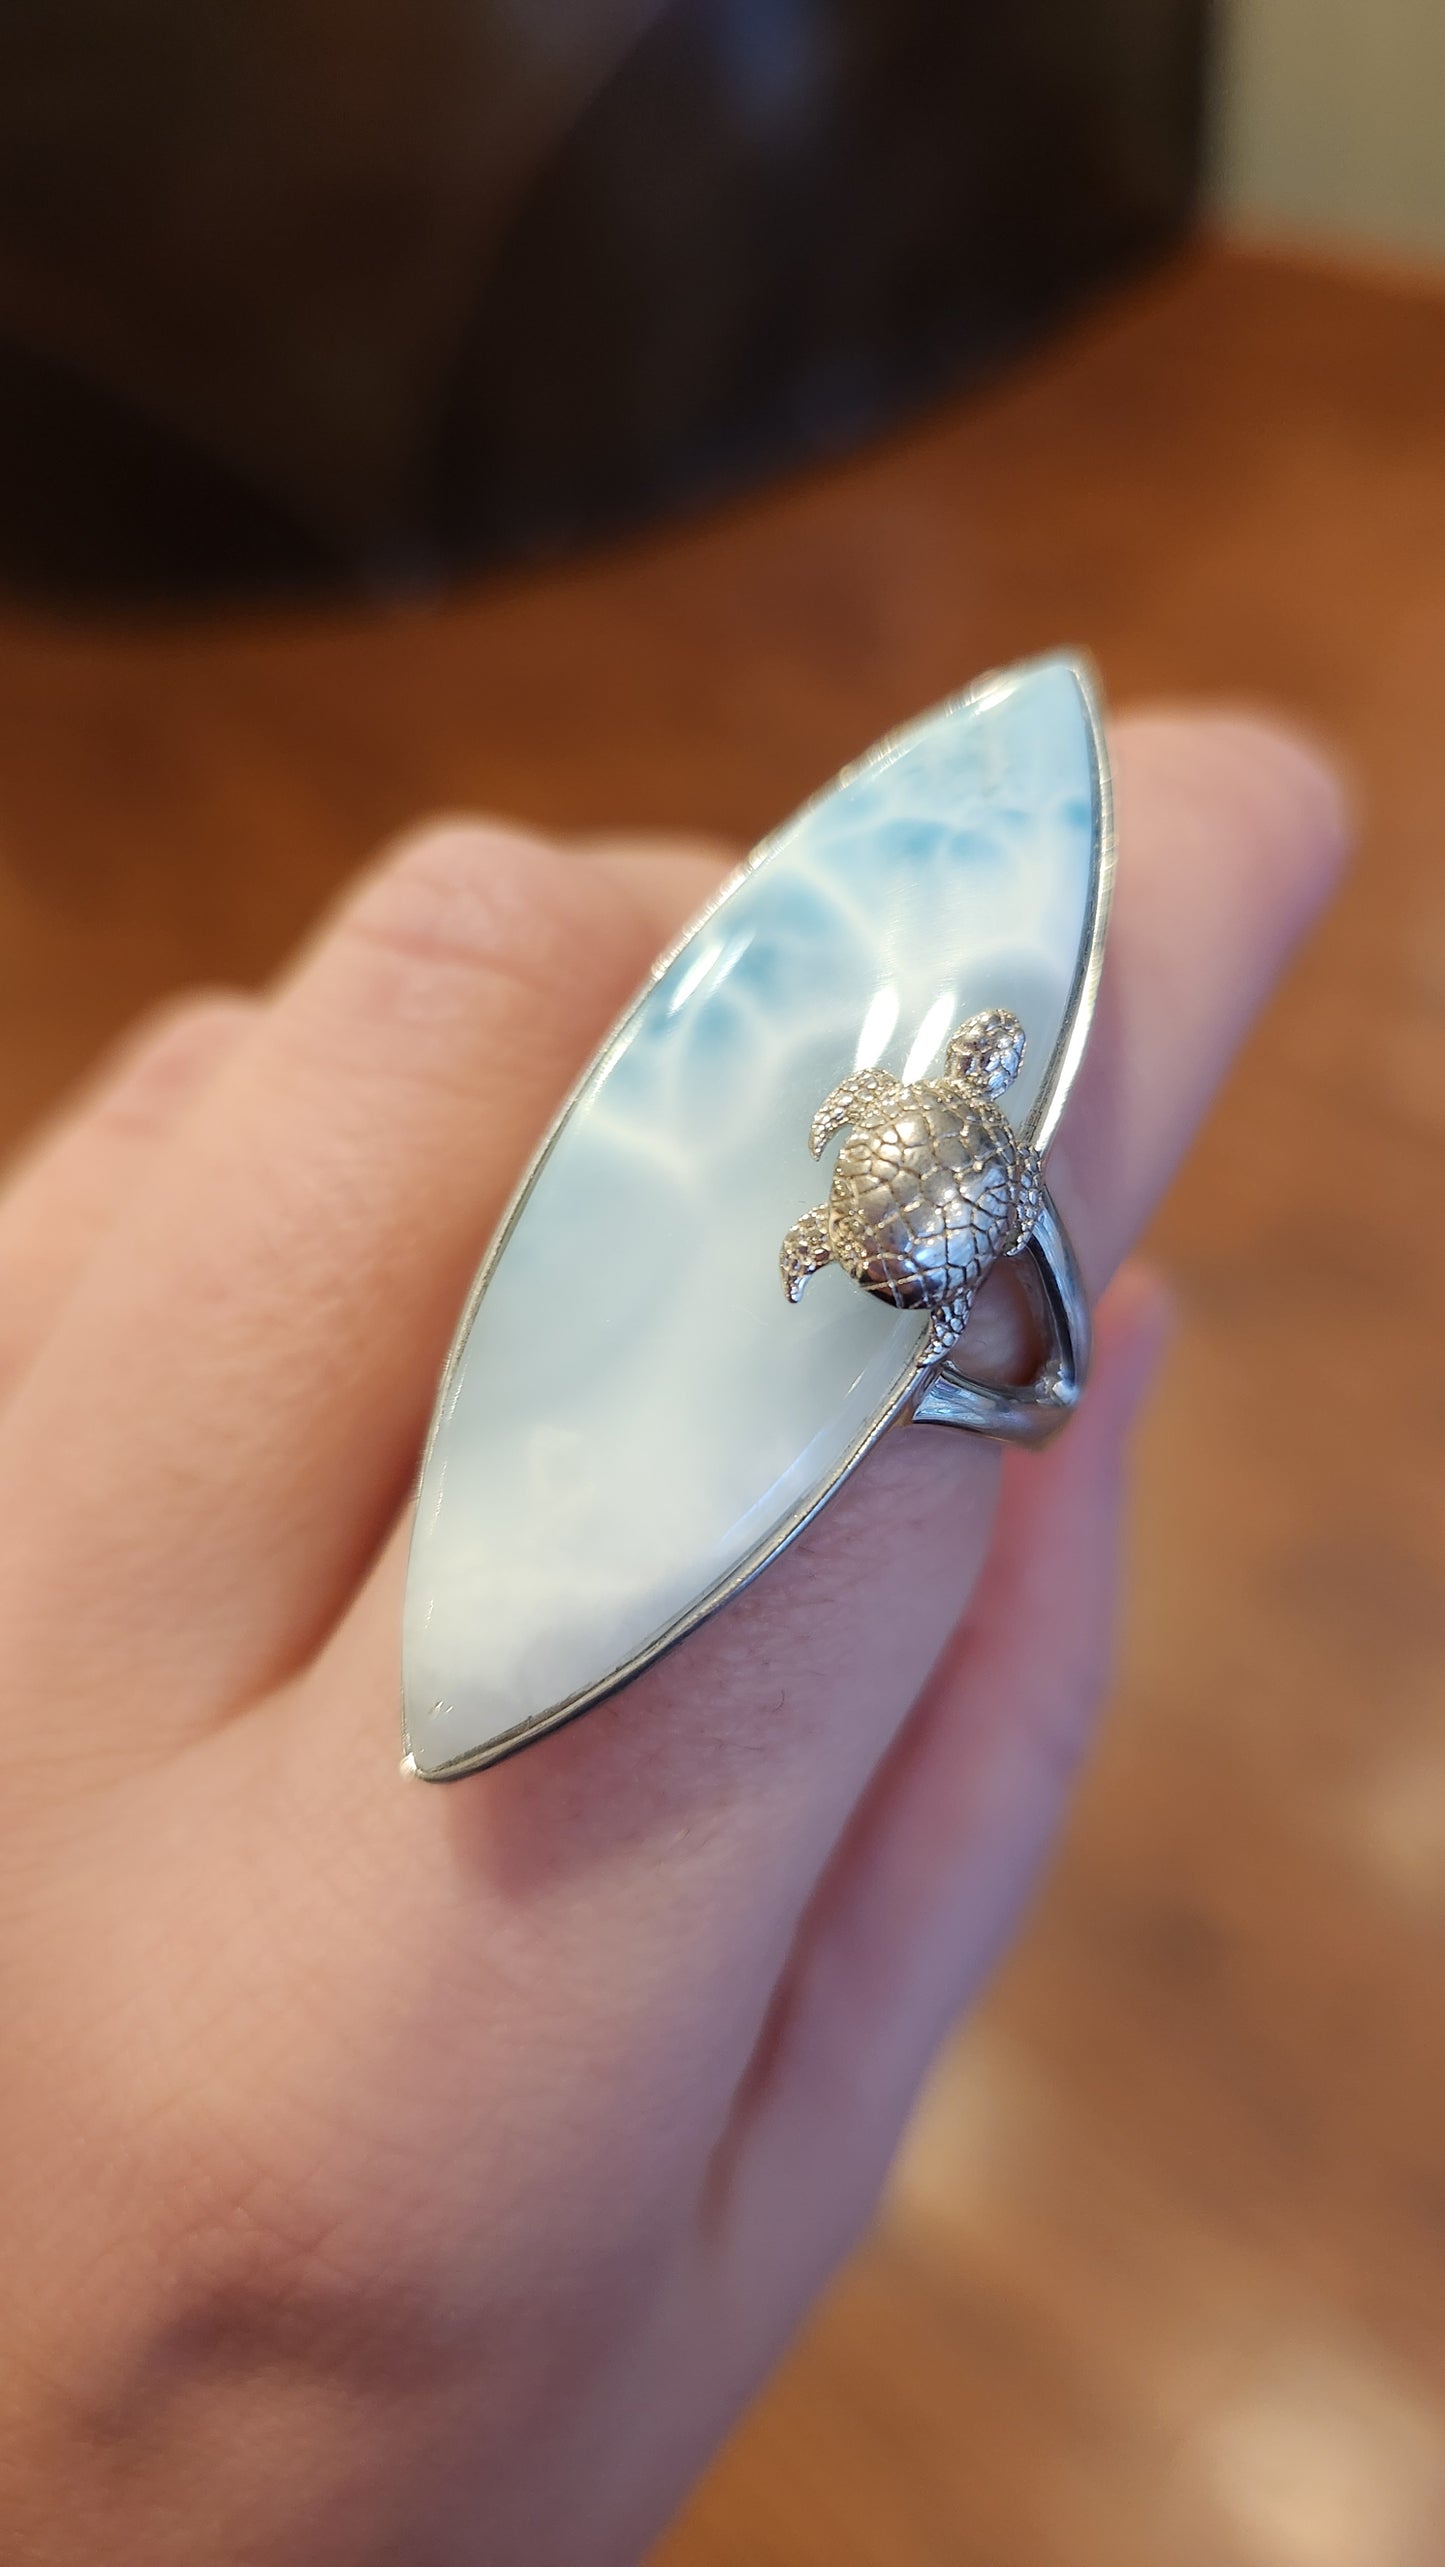 Sterling silver large marquis larimar ring with turtle